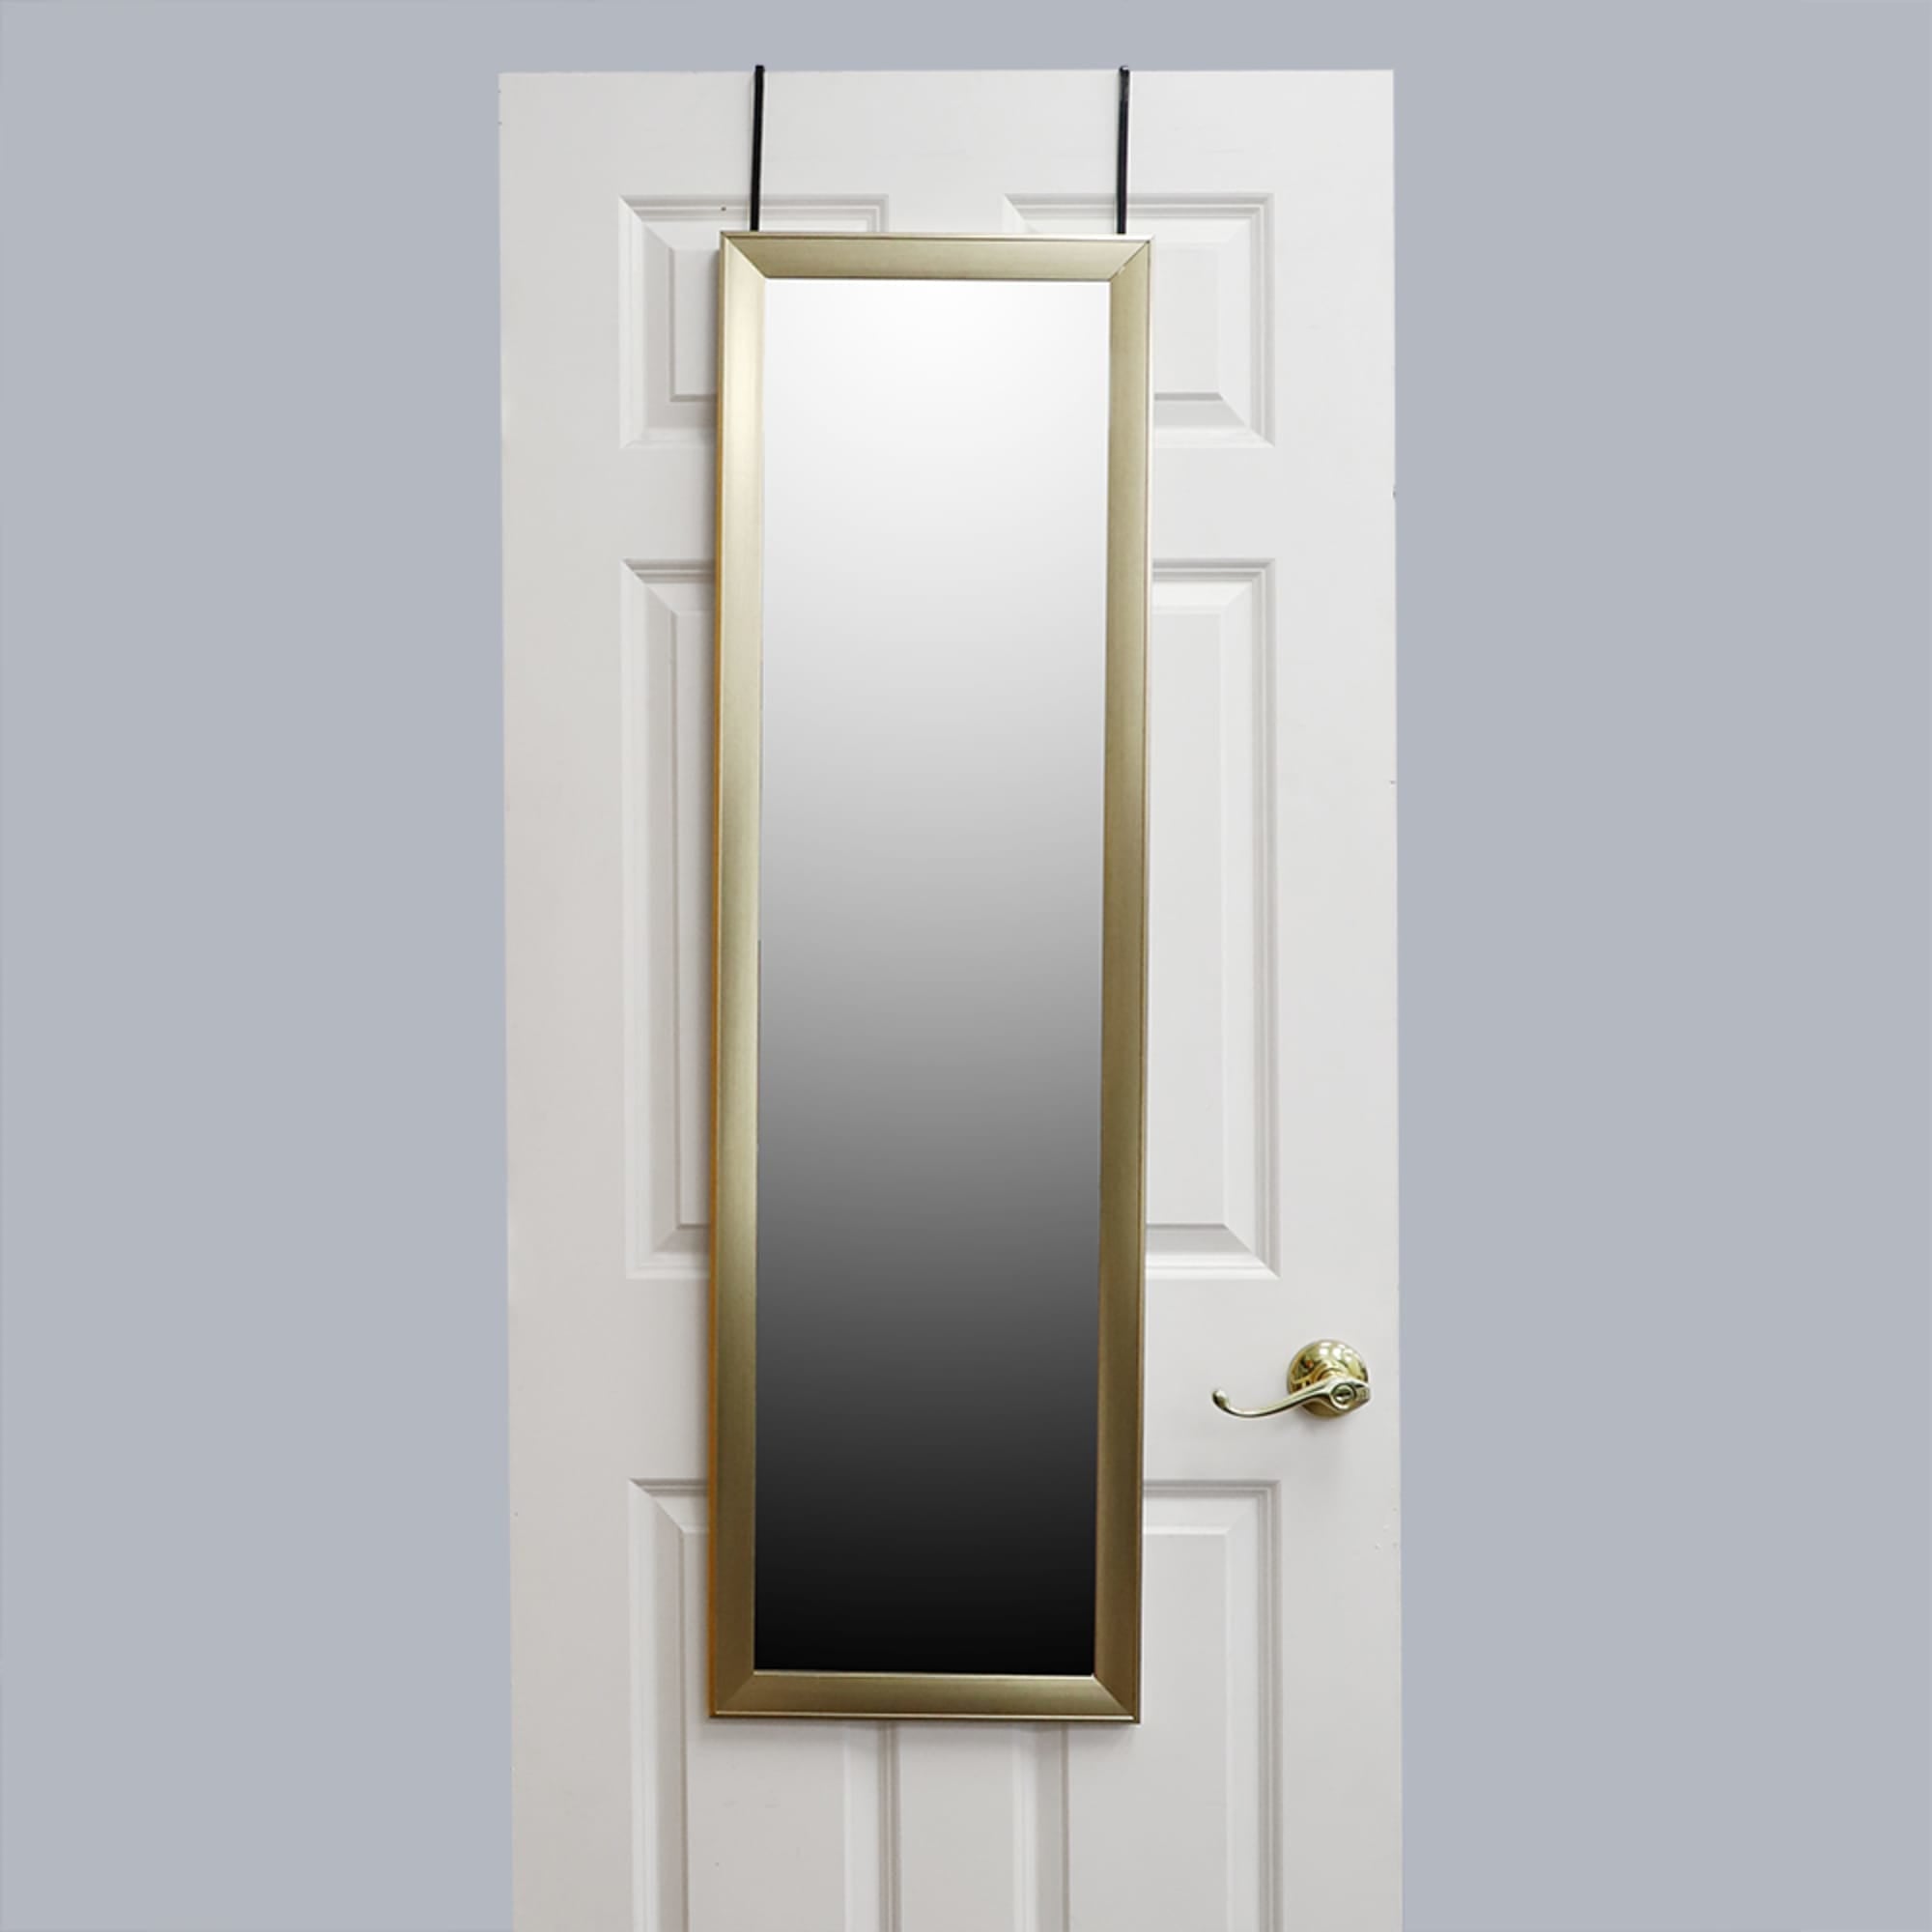 Home Basics Over The Door Mirror, Gold $12.00 EACH, CASE PACK OF 6